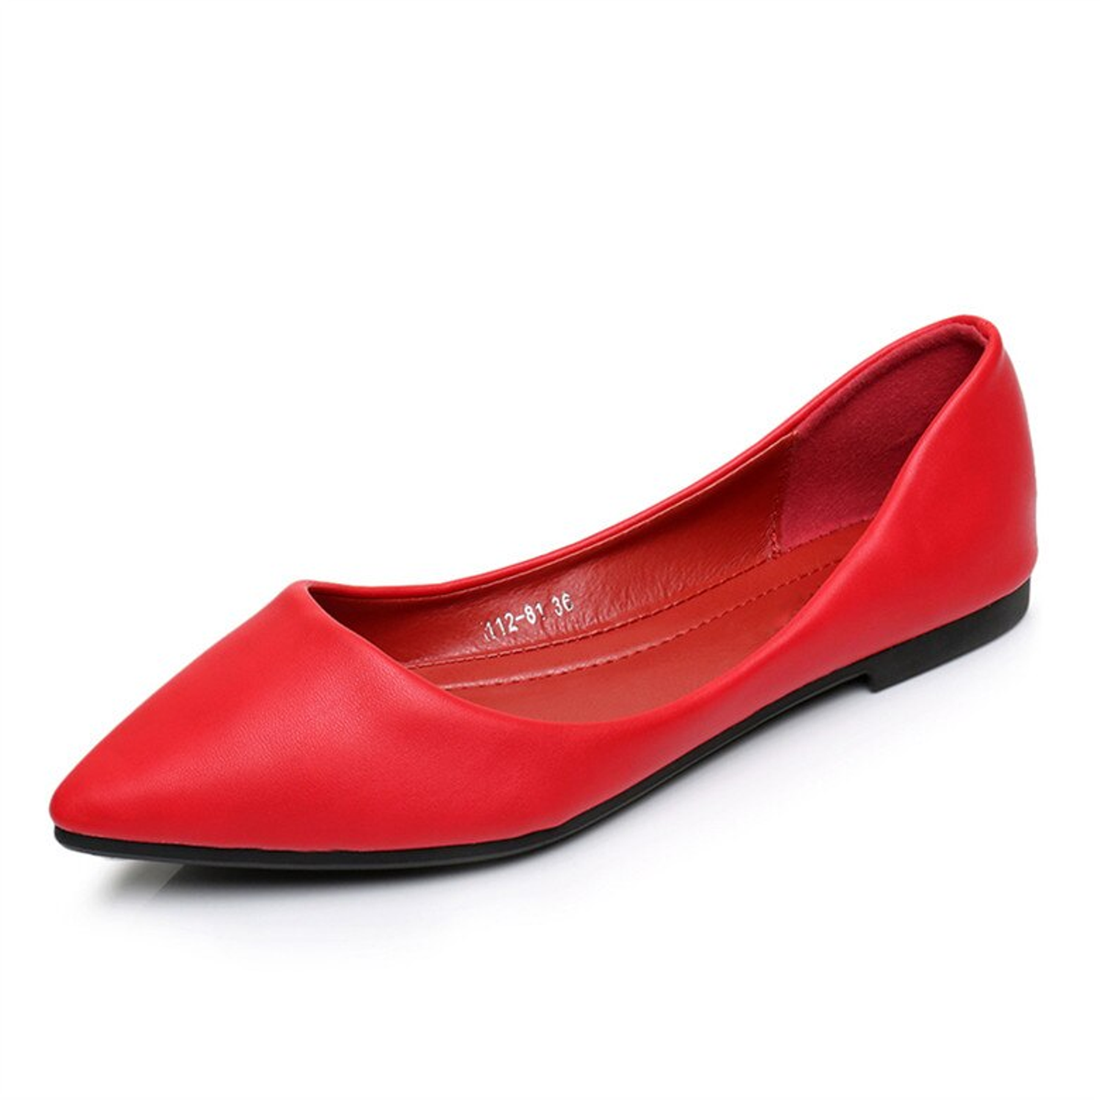 Women's Spring/Autumn Leather Pointed Toe Flats